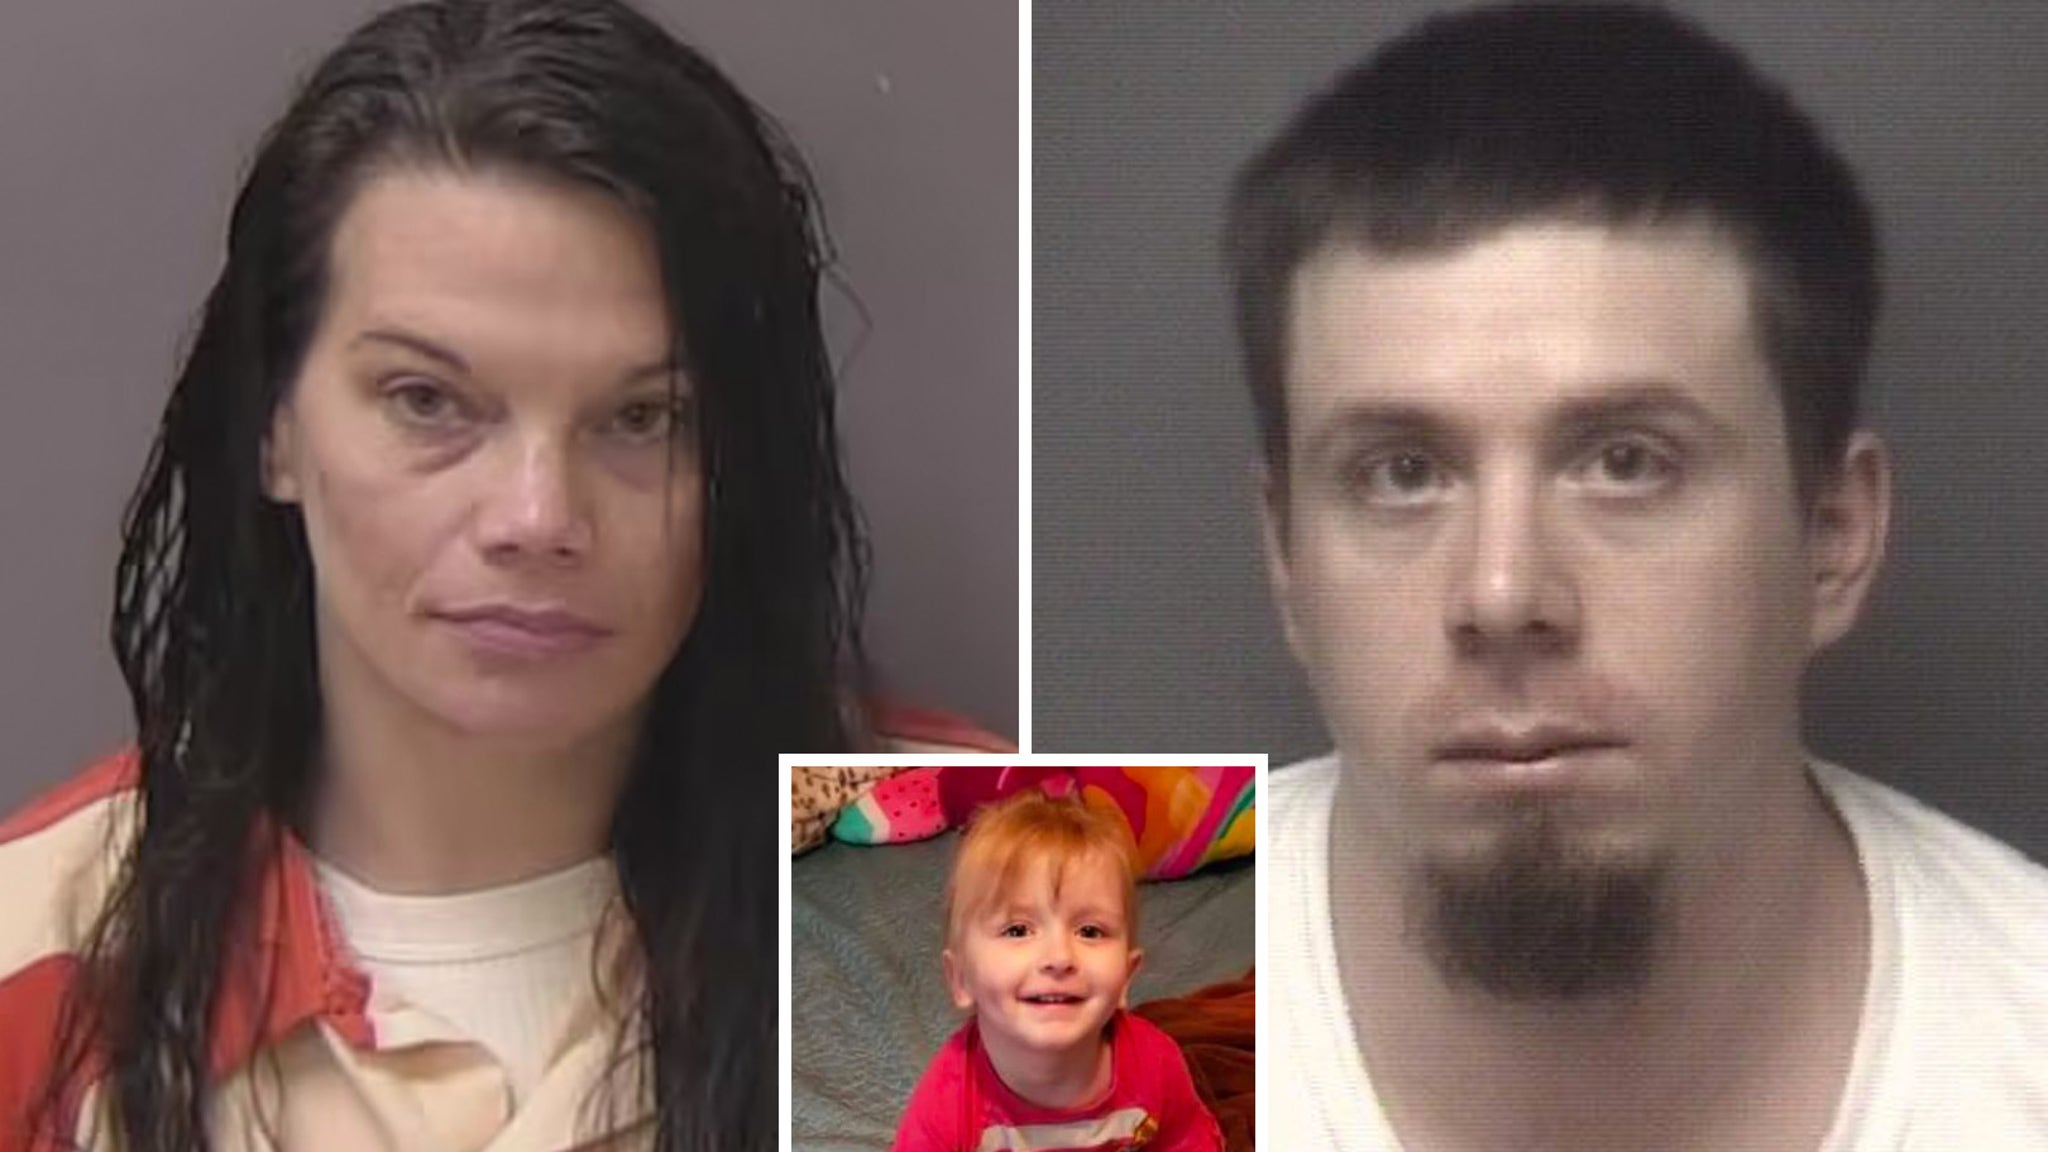 Friends of Incarcerated Mom Took in Her 3-Year-Old Girl, Then 'Tortured Her to Death'